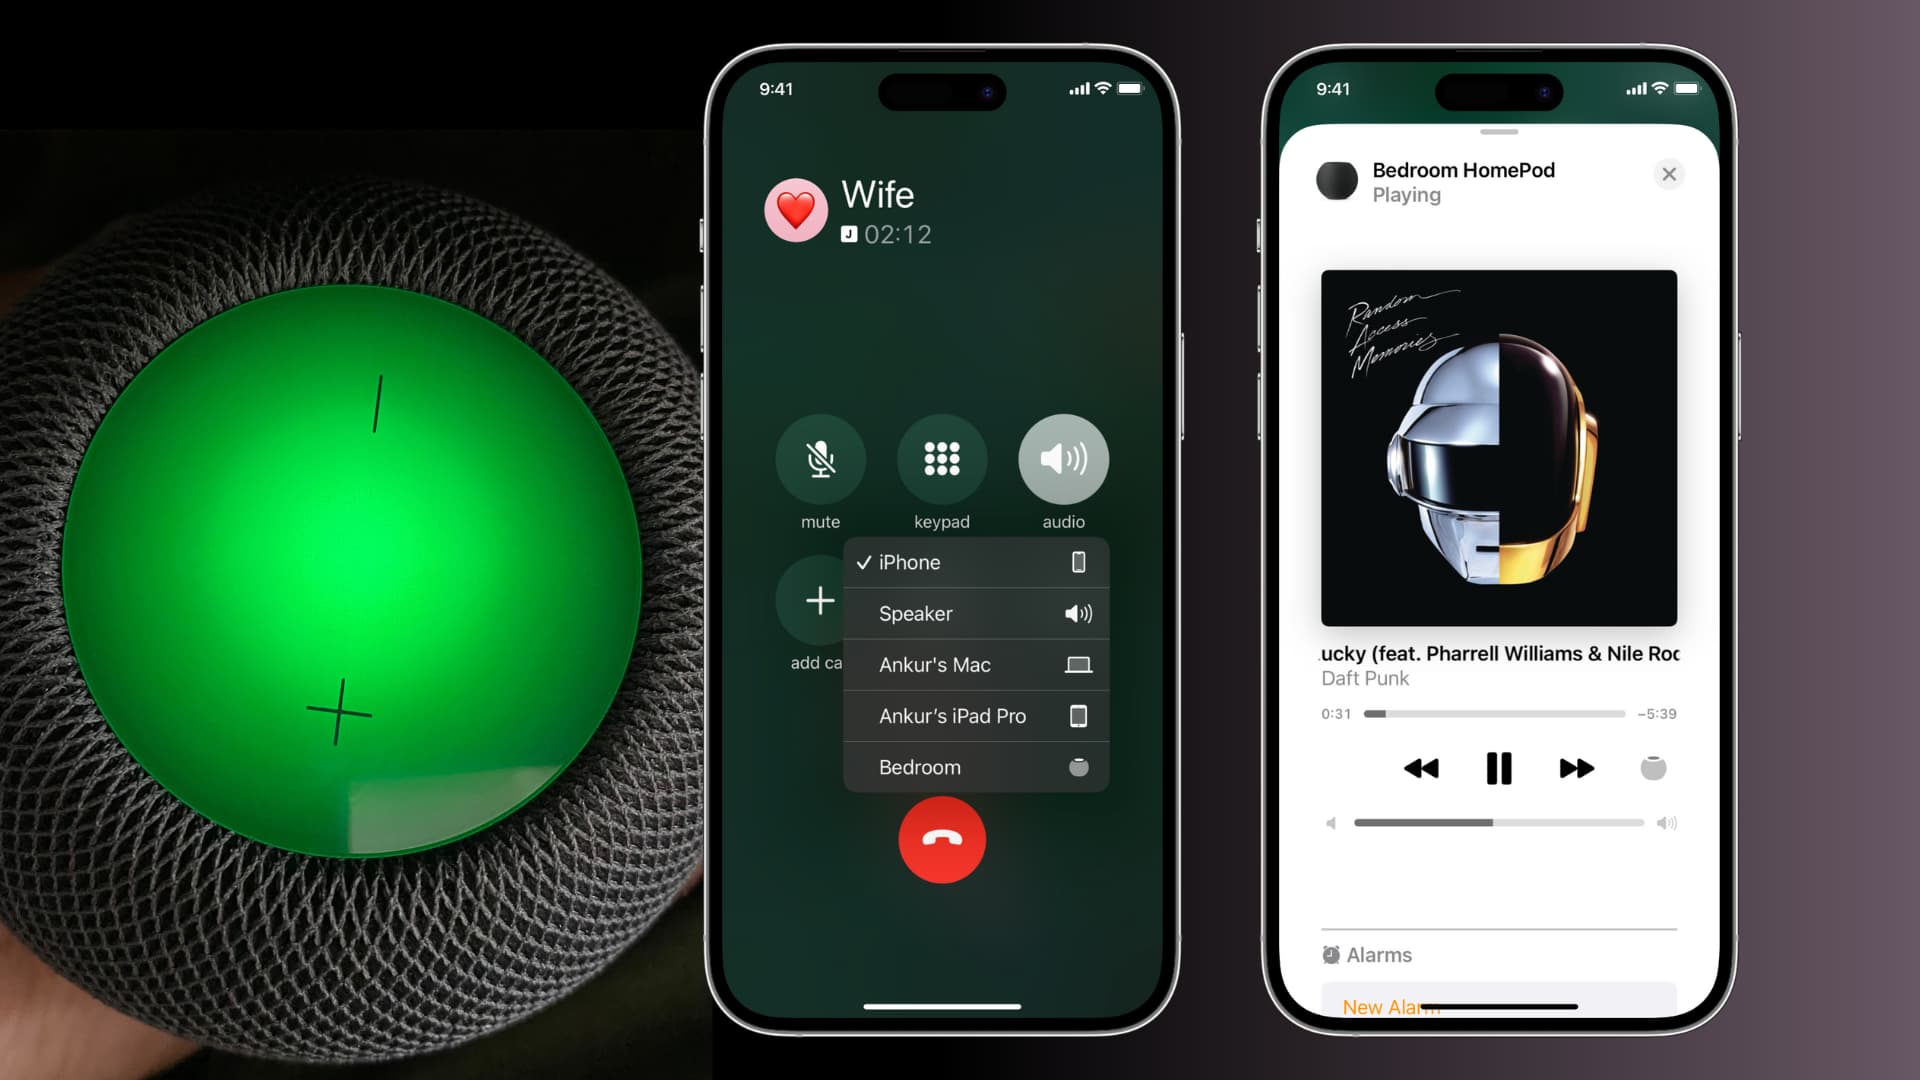 Transfer audio and phone call from iPhone to HomePod